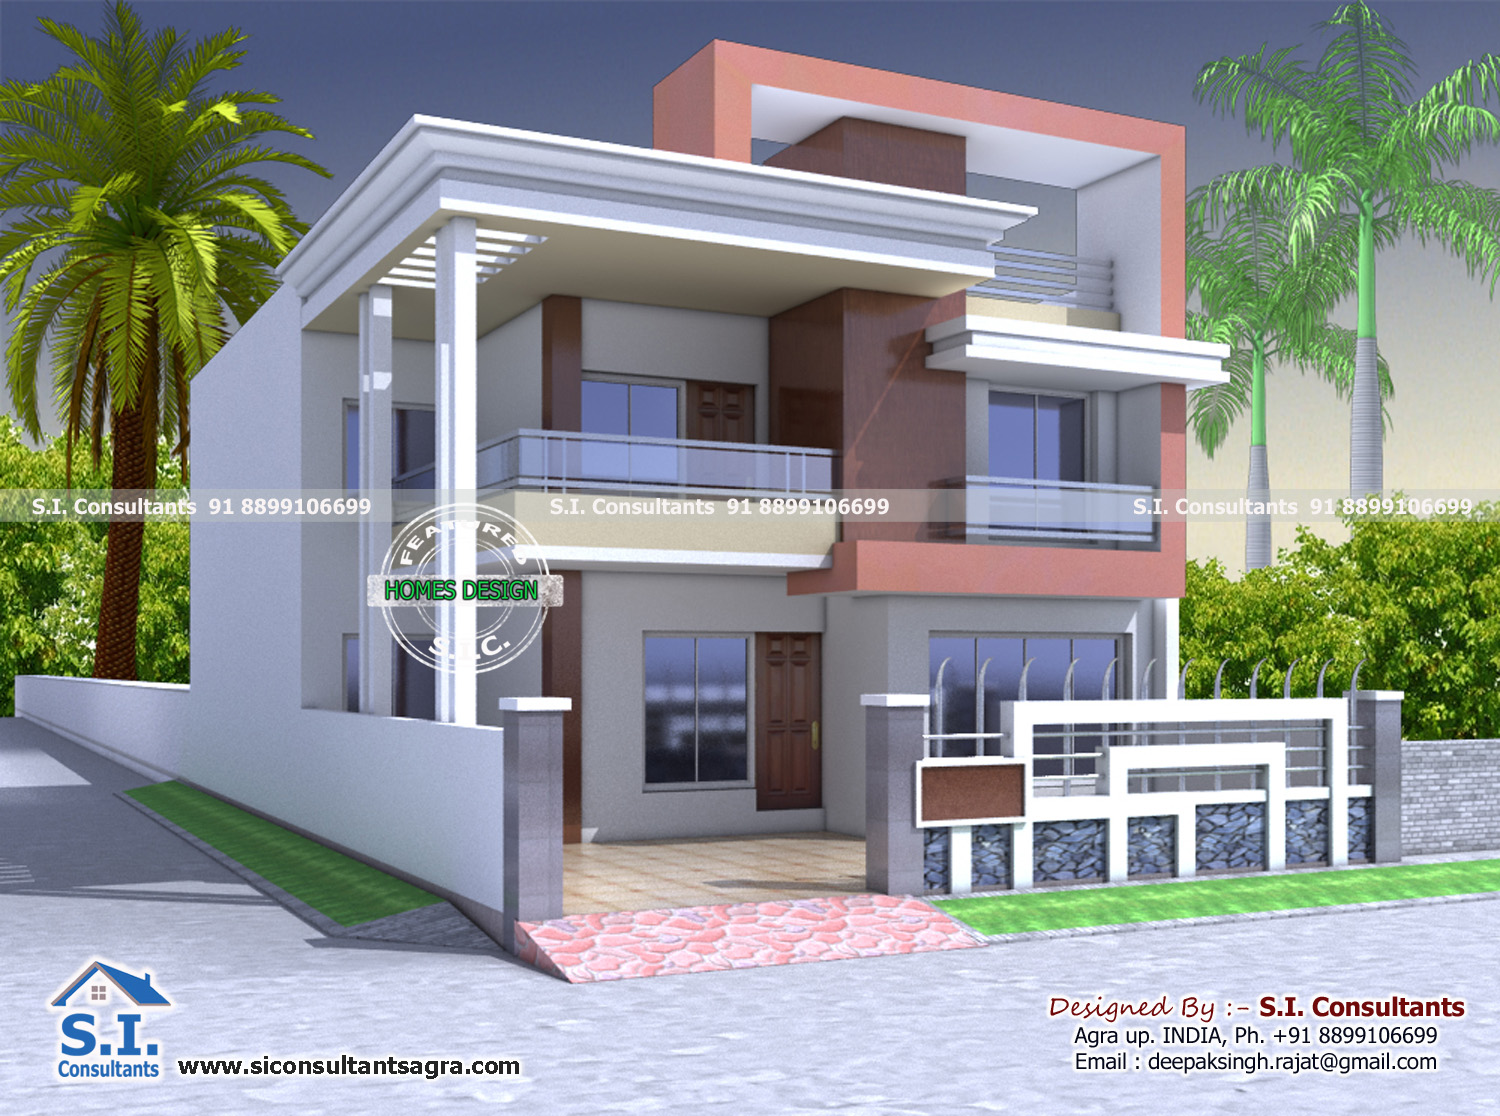 S.I. consultants: 35x47 Indian home design